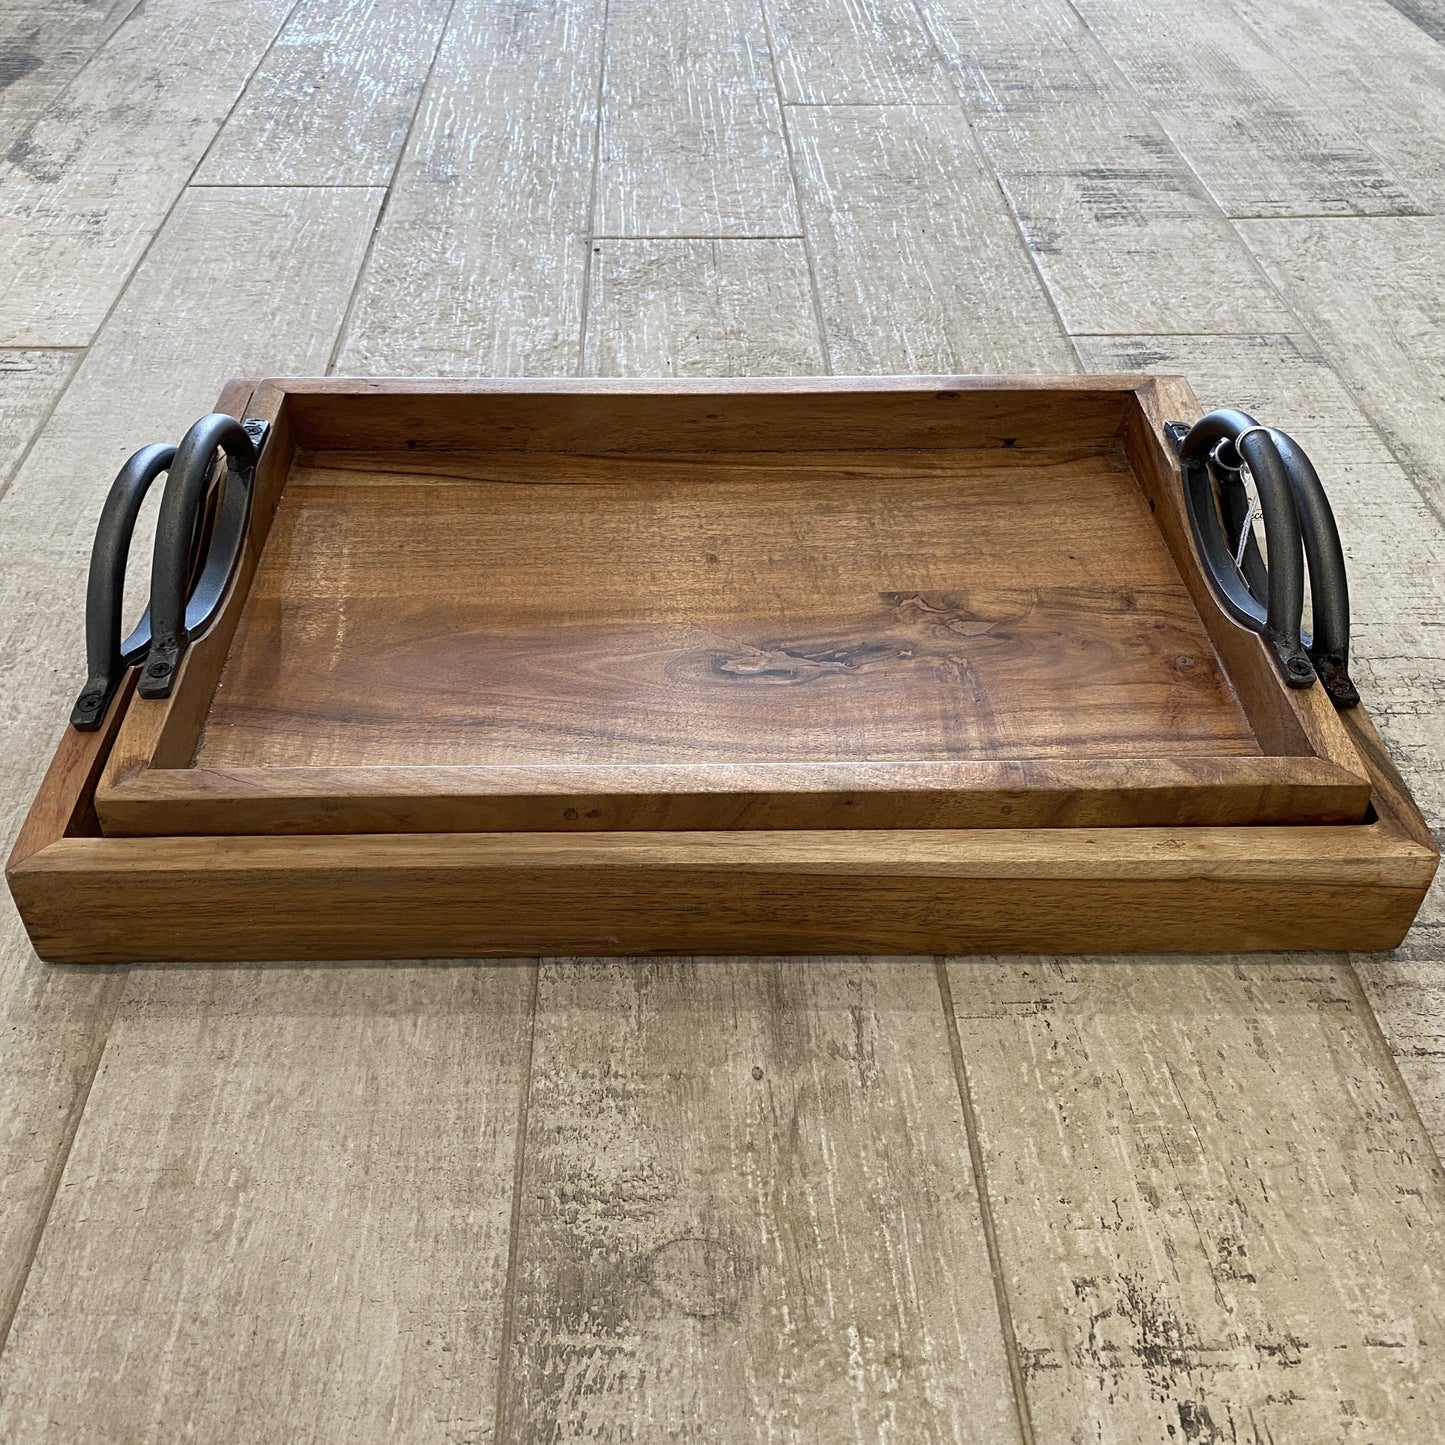 Wooden Tray with Curved Handles